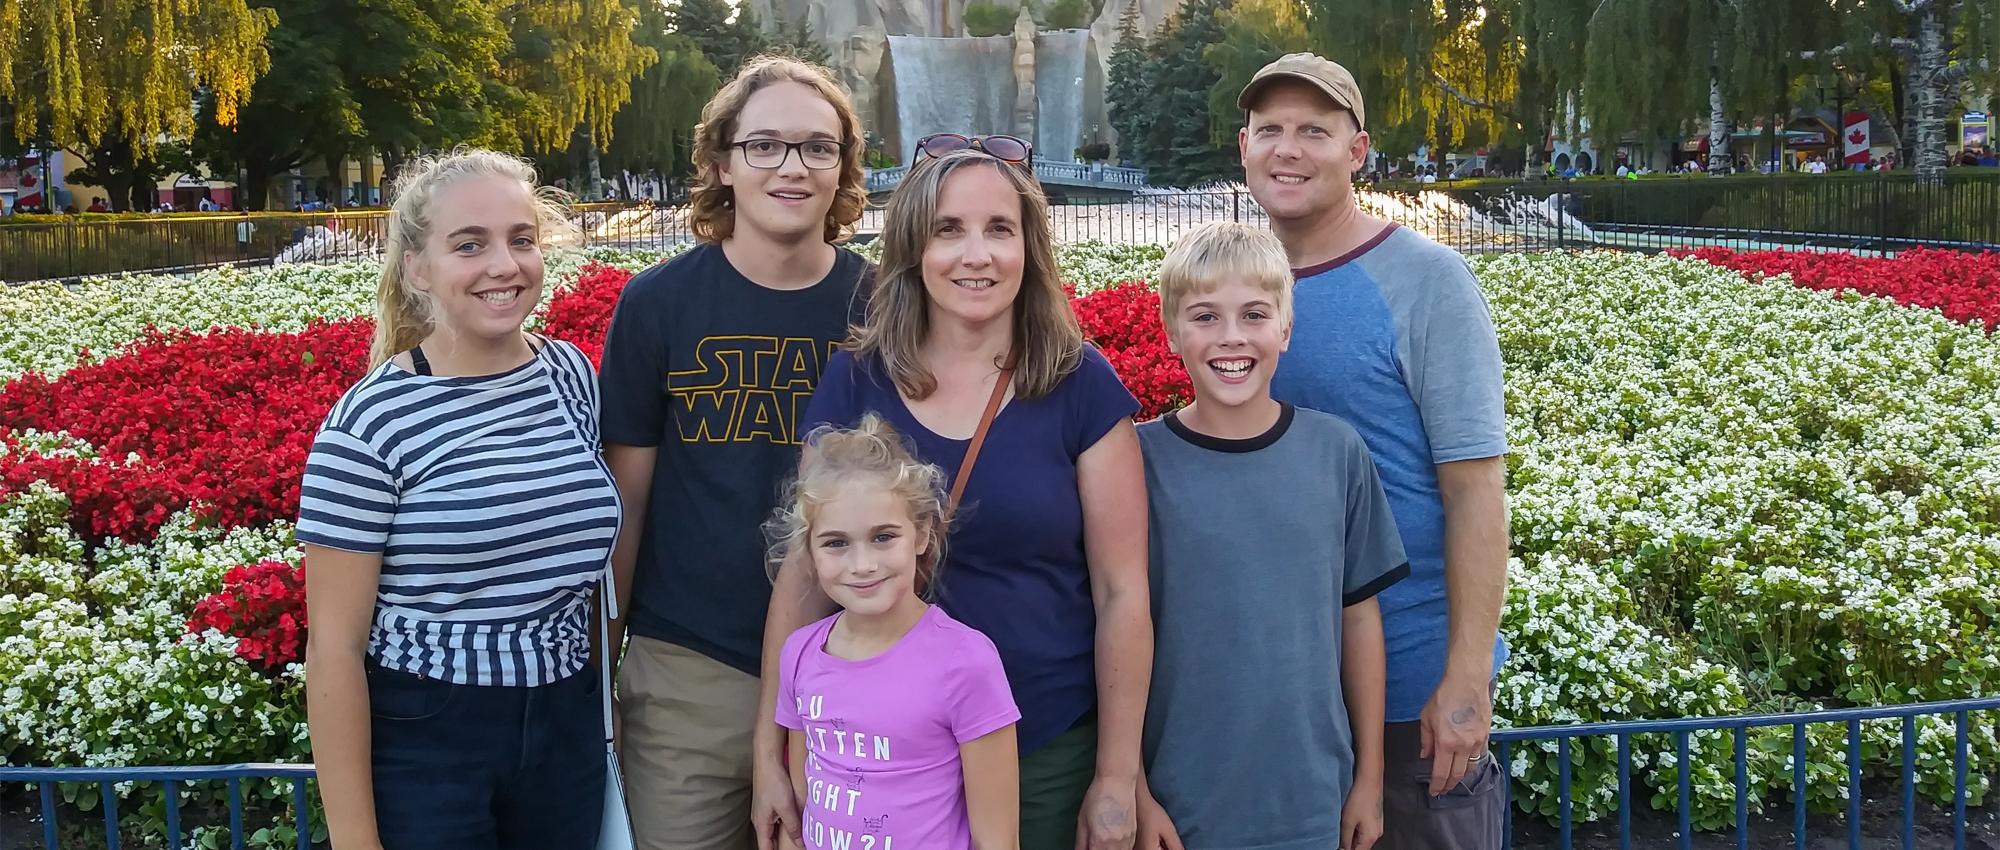 Featured Image of Scott Norton and Nadine Norton with their children and Elsa Norton standing in front of garden of flowers at the amusement park